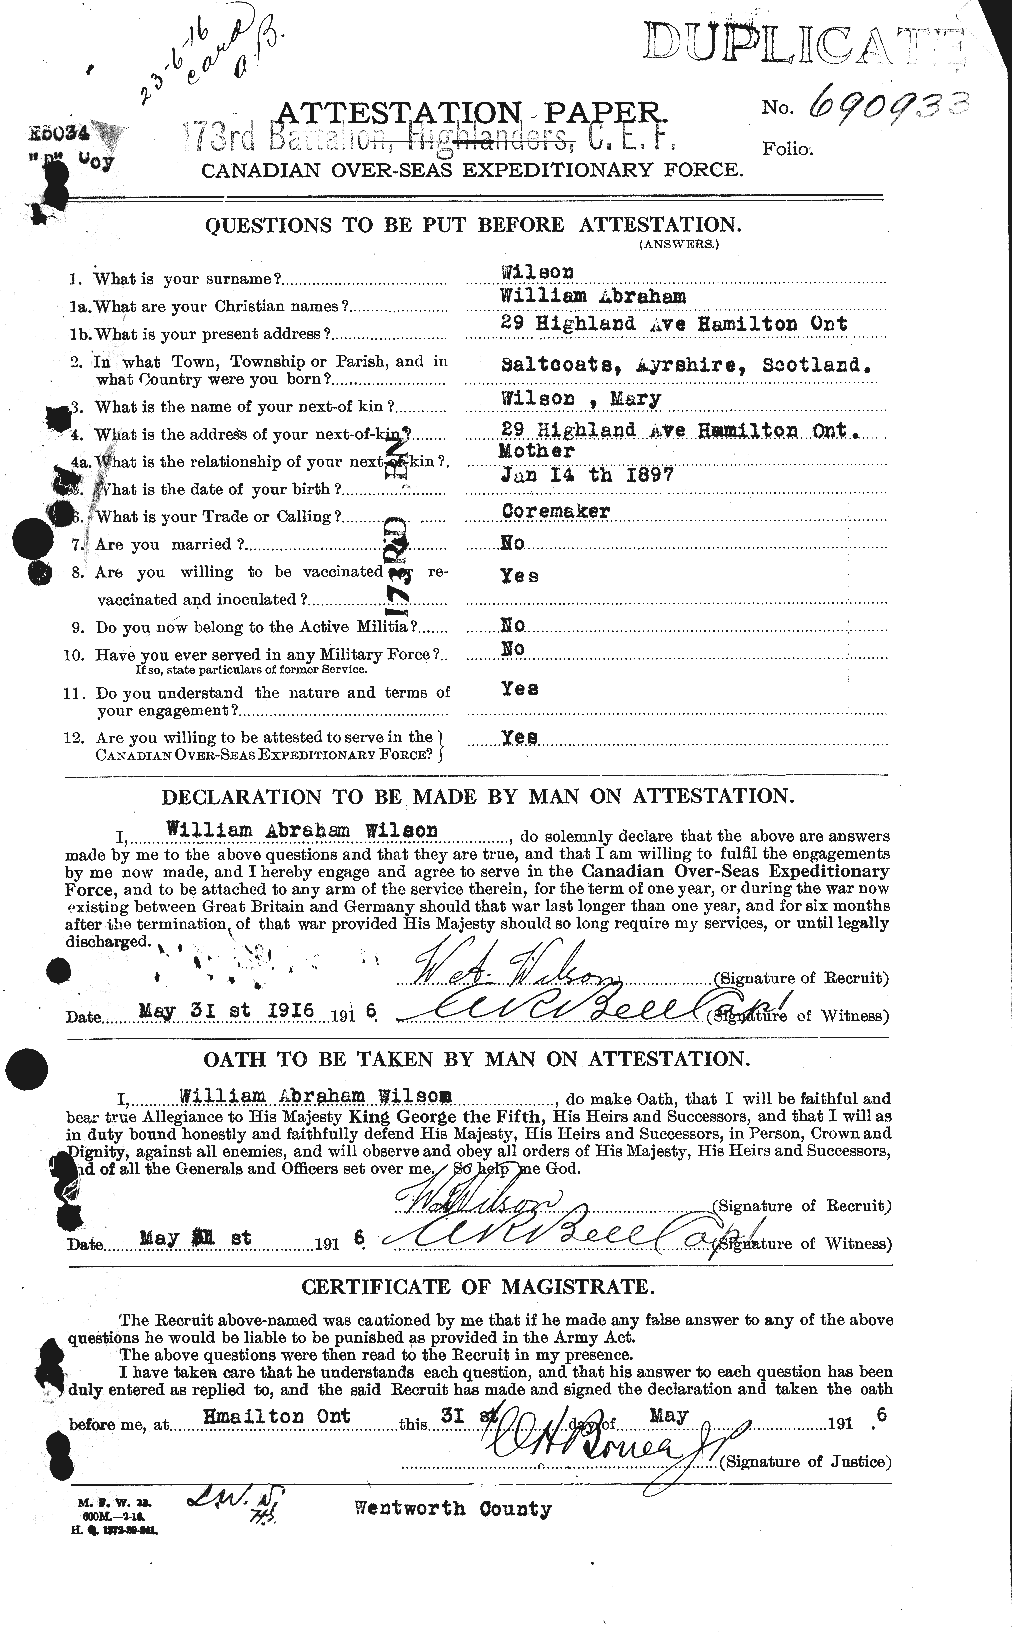 Personnel Records of the First World War - CEF 681920a